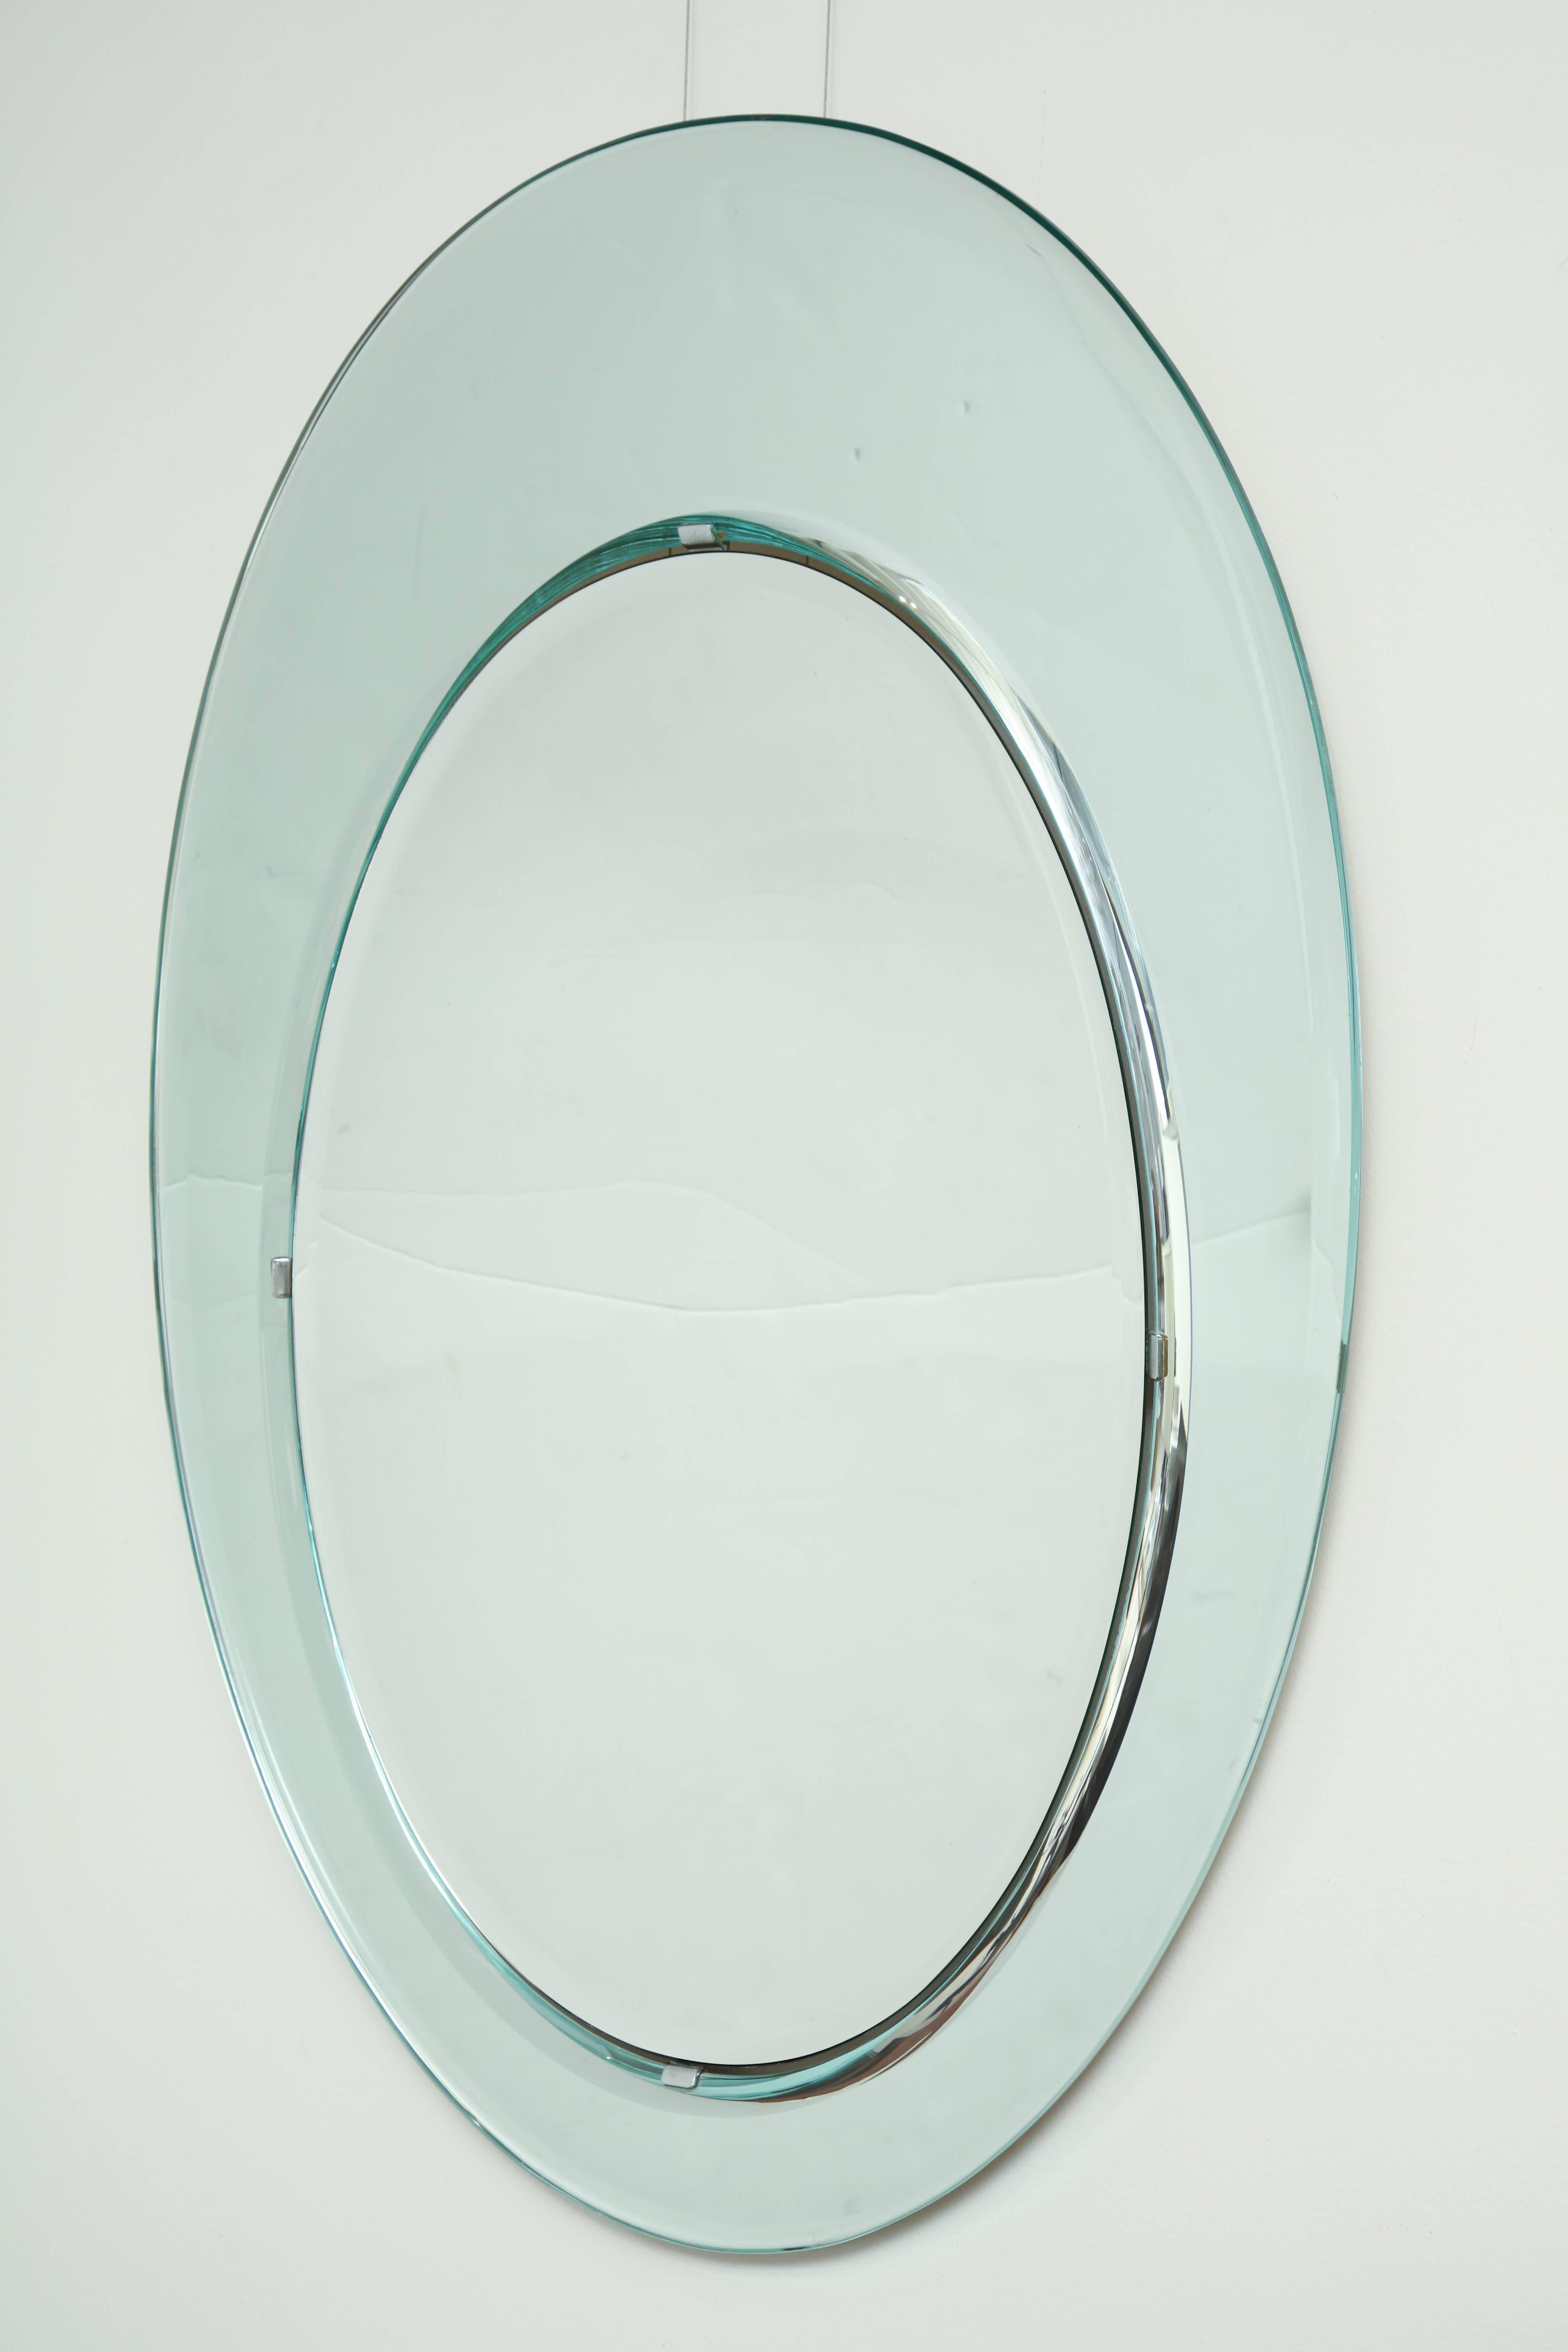 Oval bevelled mirror set in bevelled mirrored frame by Fontana Arte, Italy, circa 1970.